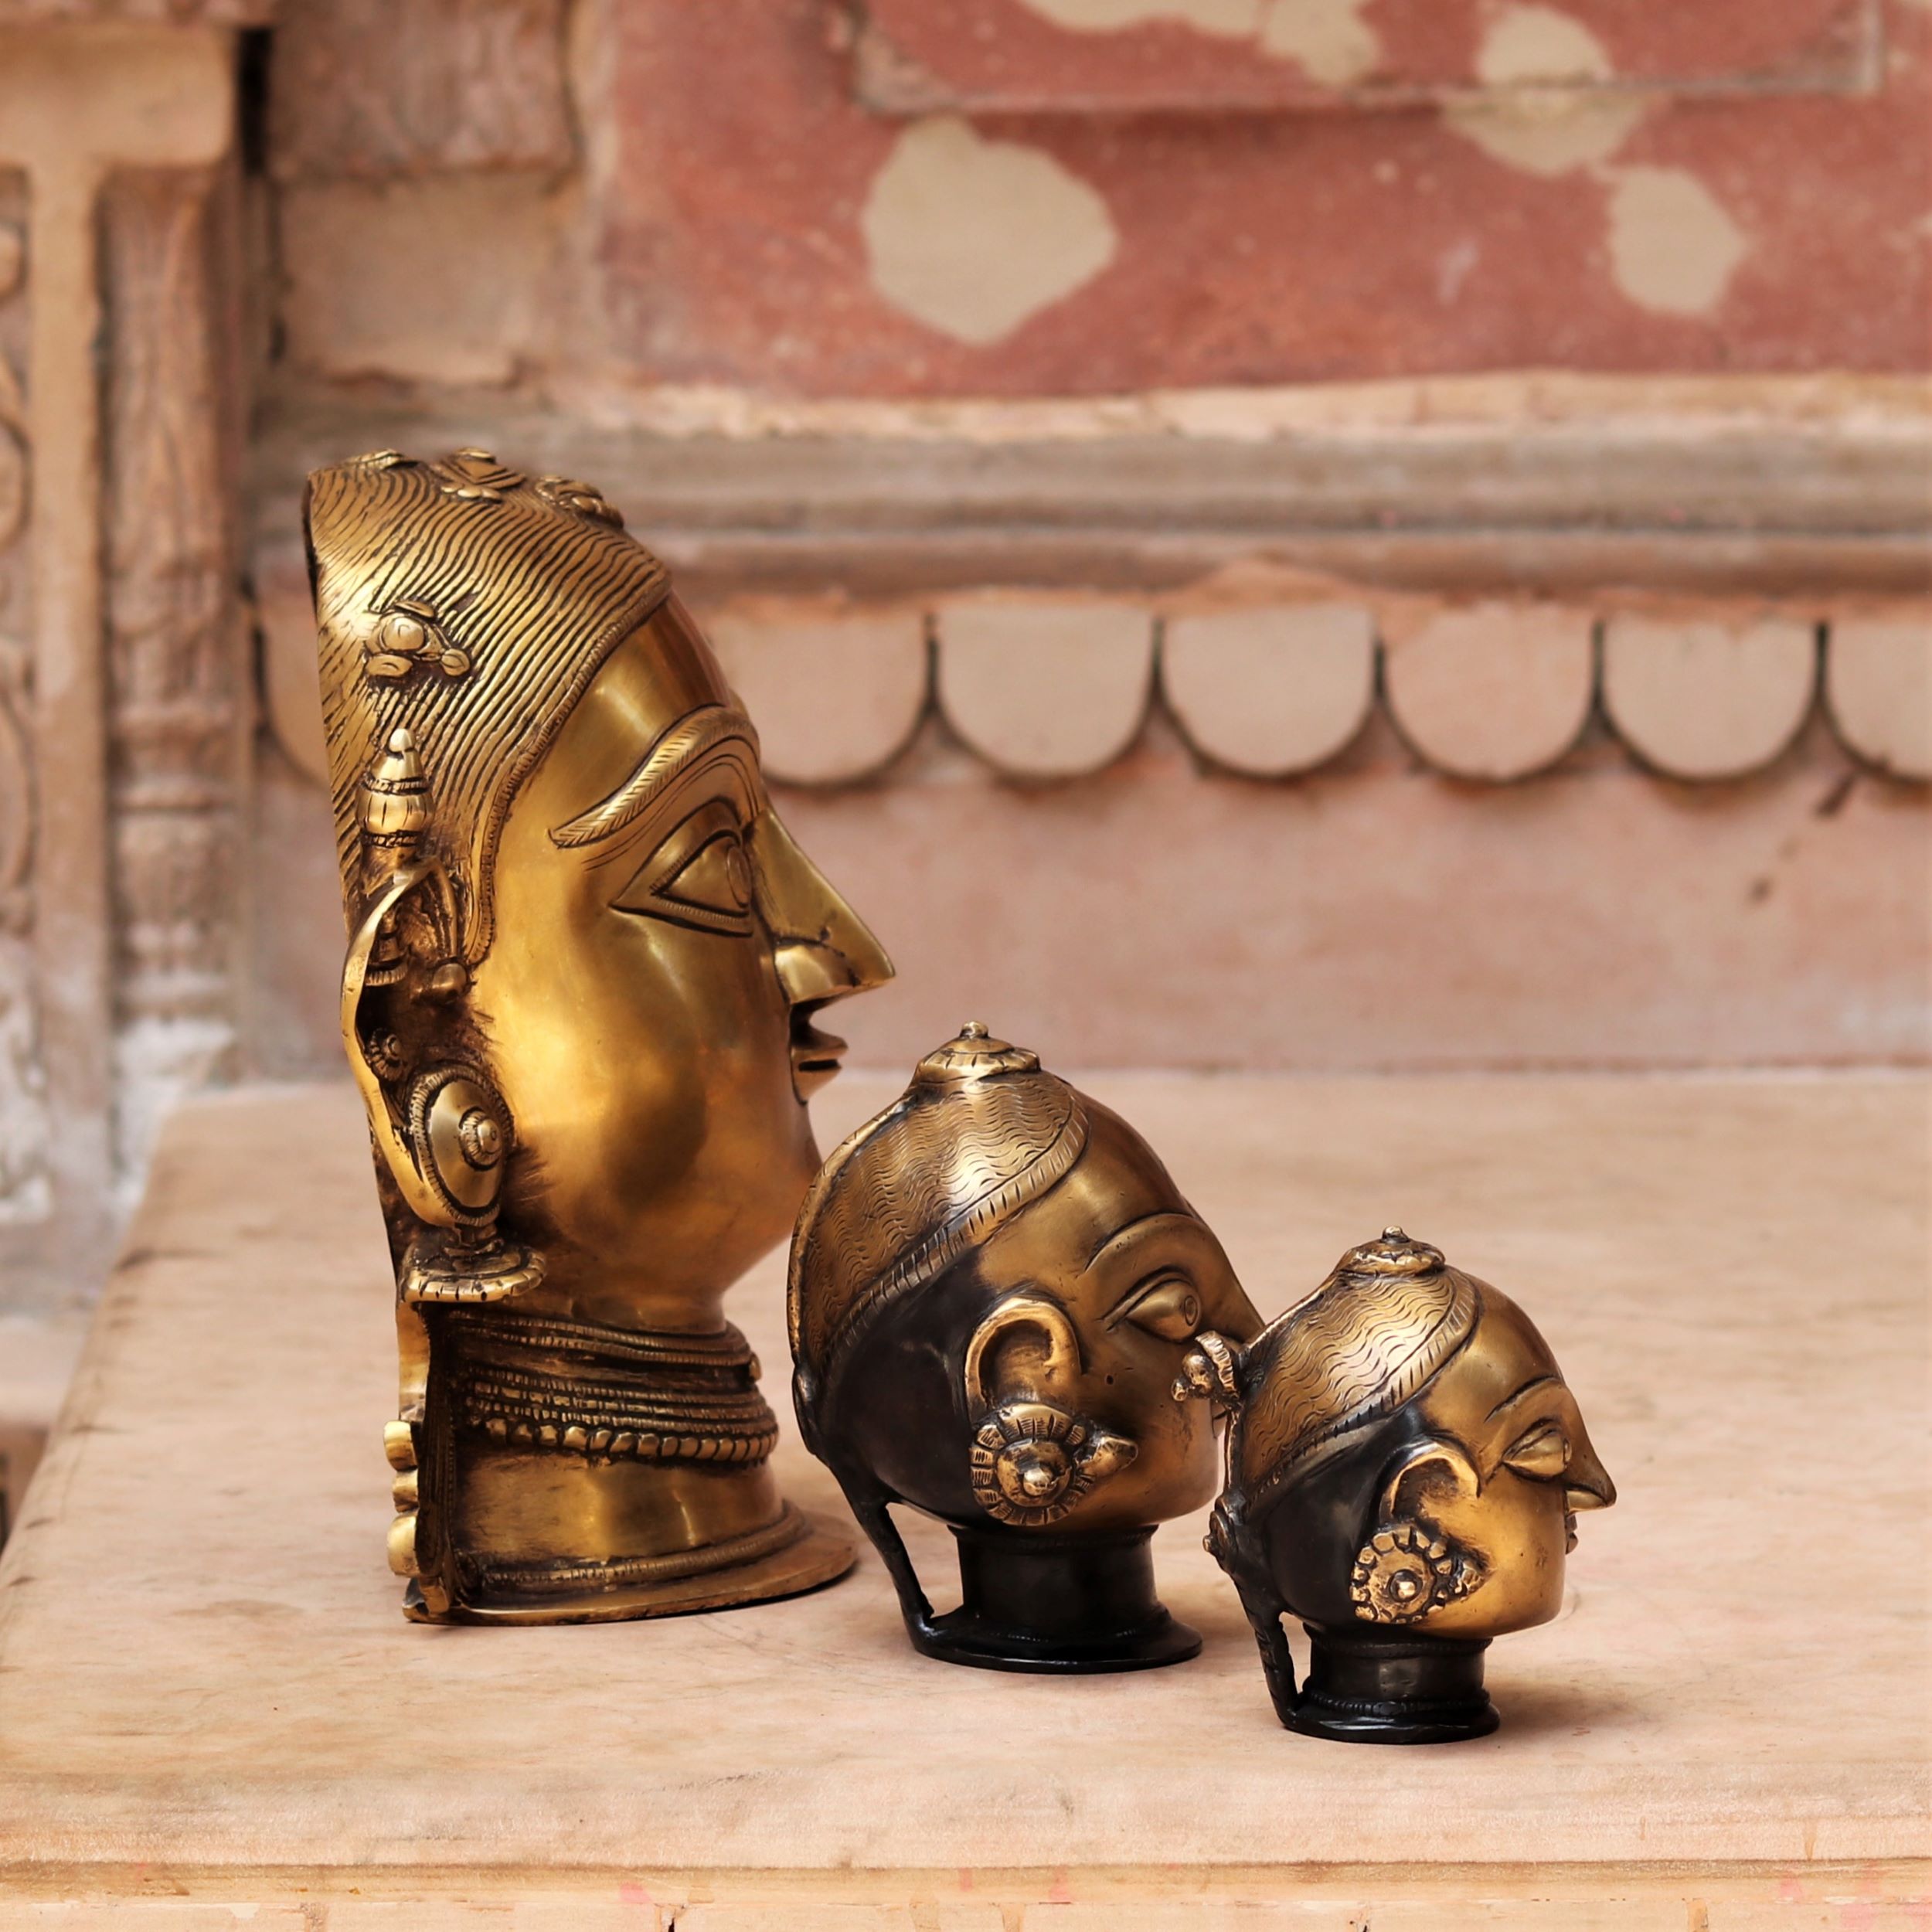 GAURI HEAD BRASS FIGURINE SHOWPIECE – 3 PIECES - Buy exclusive brass  statues, collectibles and decor